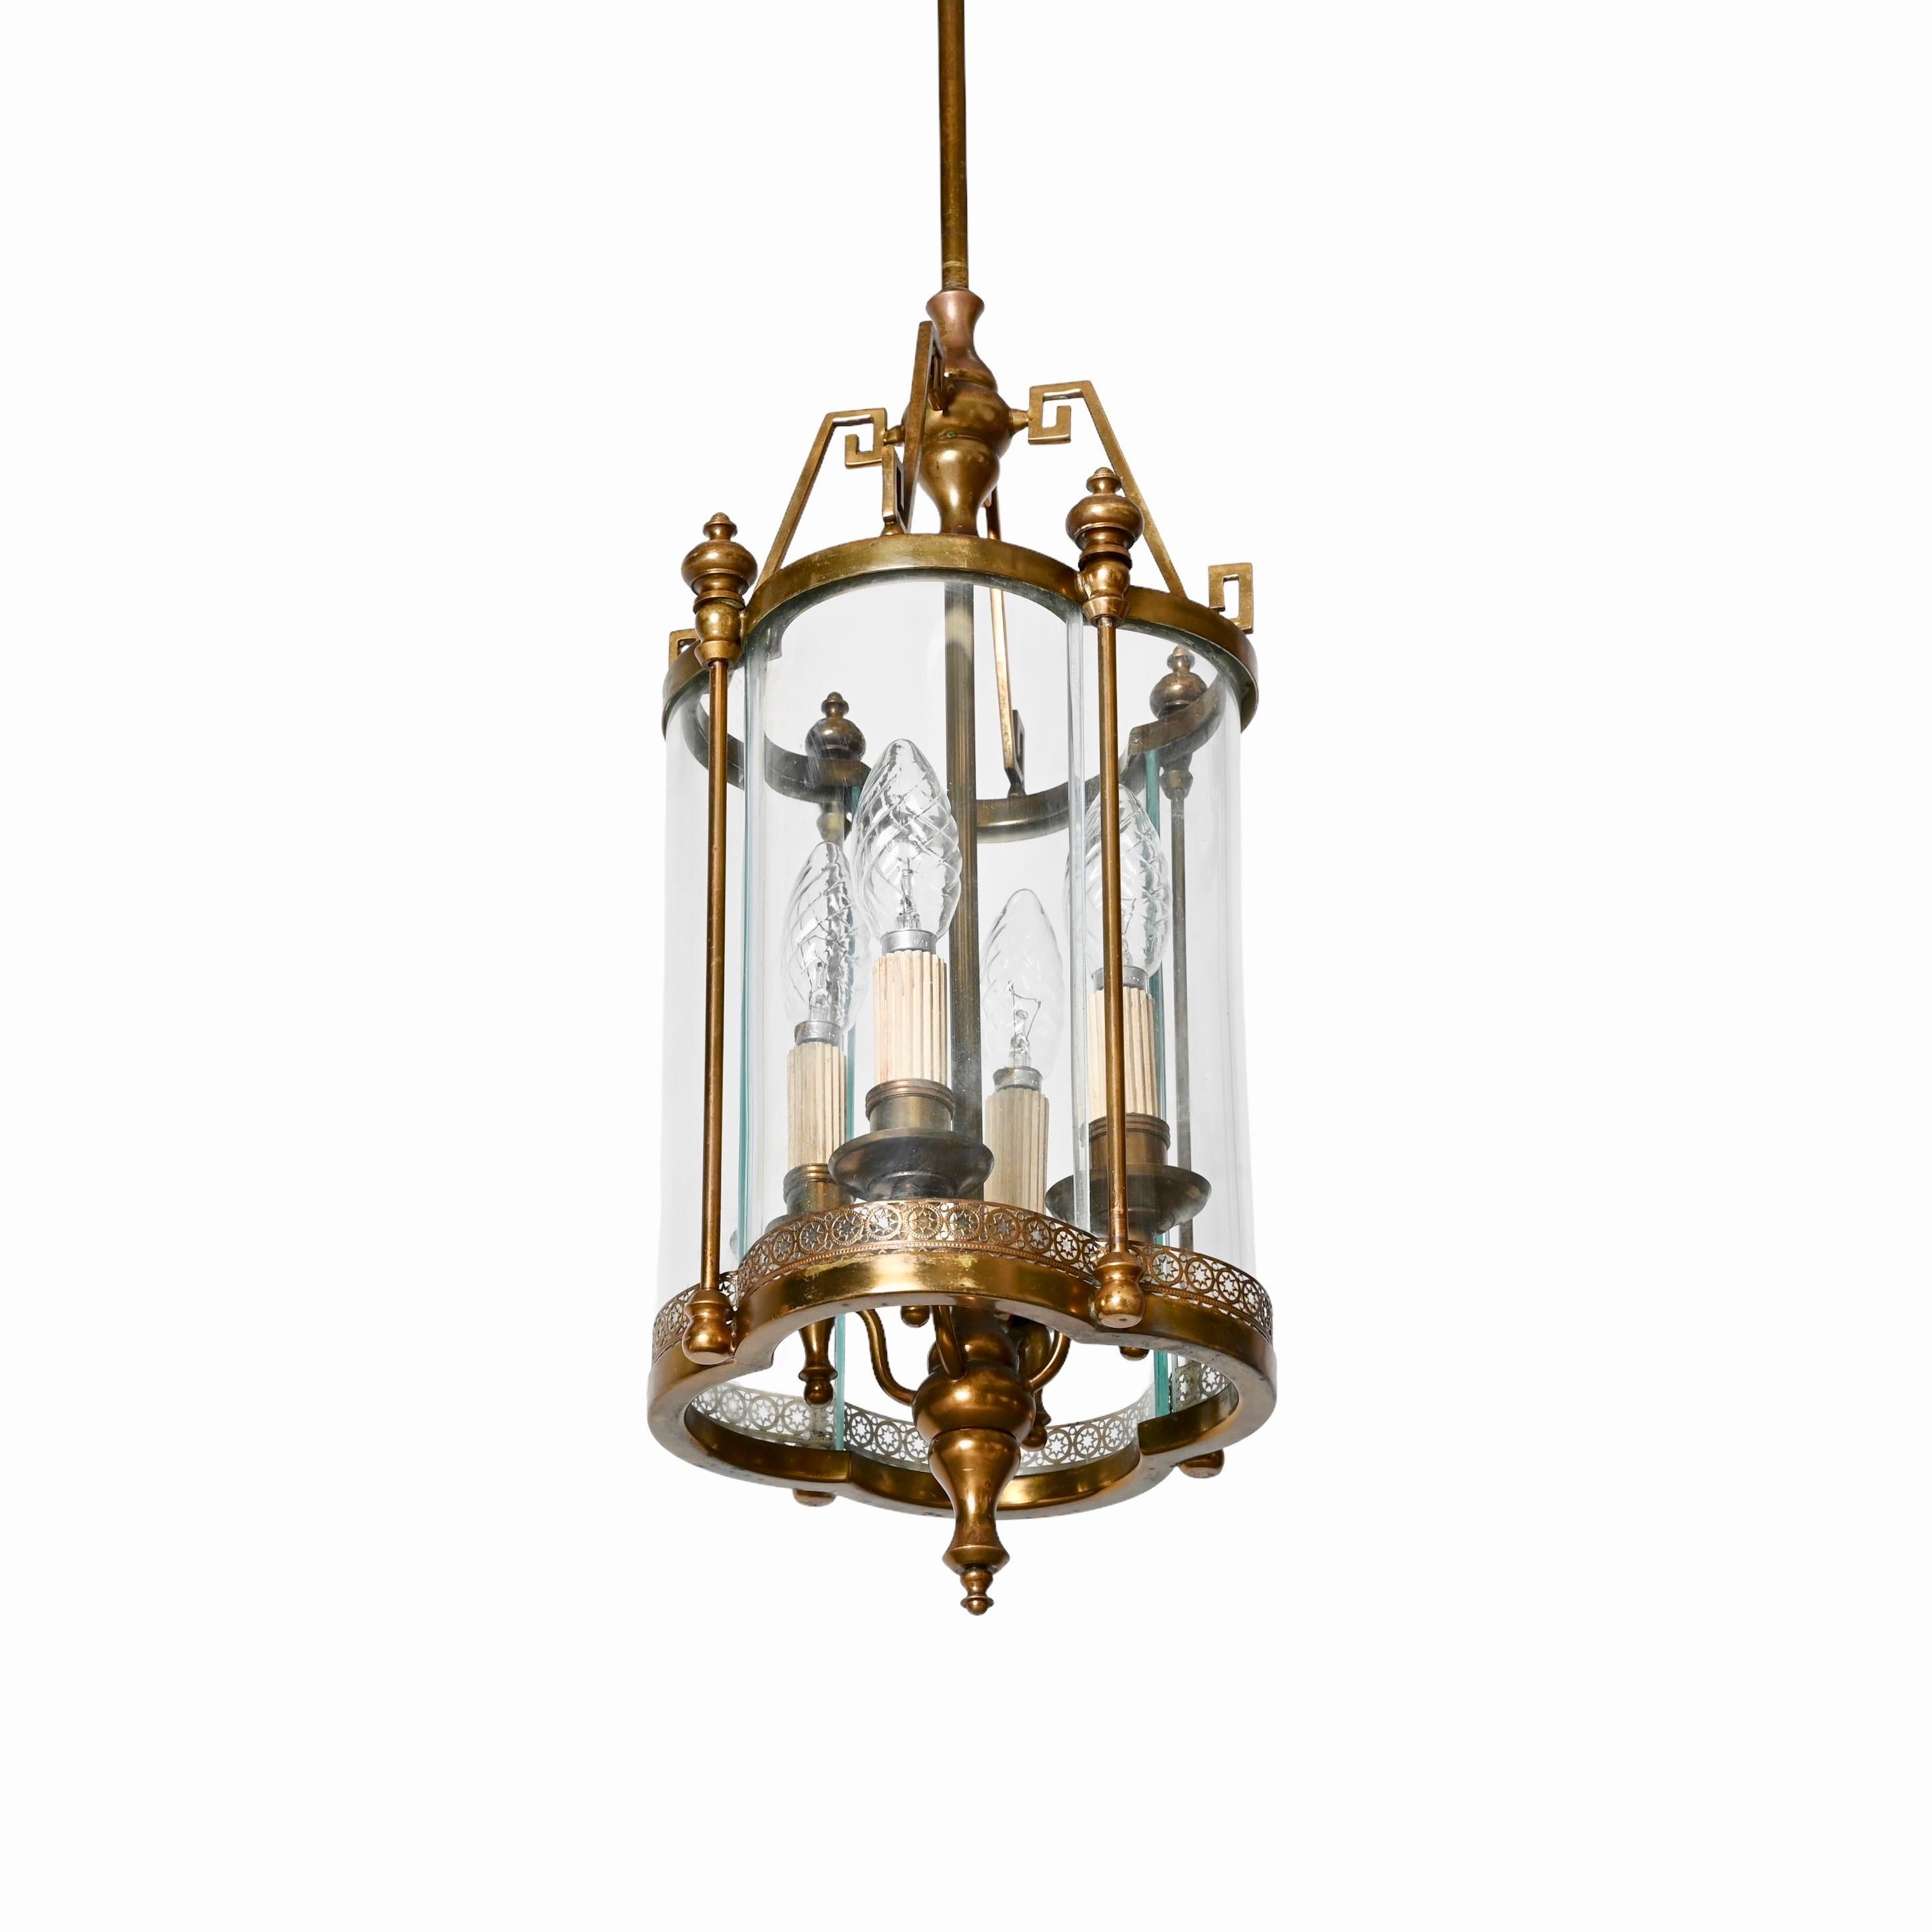 Superb brass and semicircular glass chandelier. This stunning pendant light was designed in Italy and inspired by the work of Adolf Loos in the 1950s.

This piece is fantastic thanks to a gorgeous and pure structure that showcases four